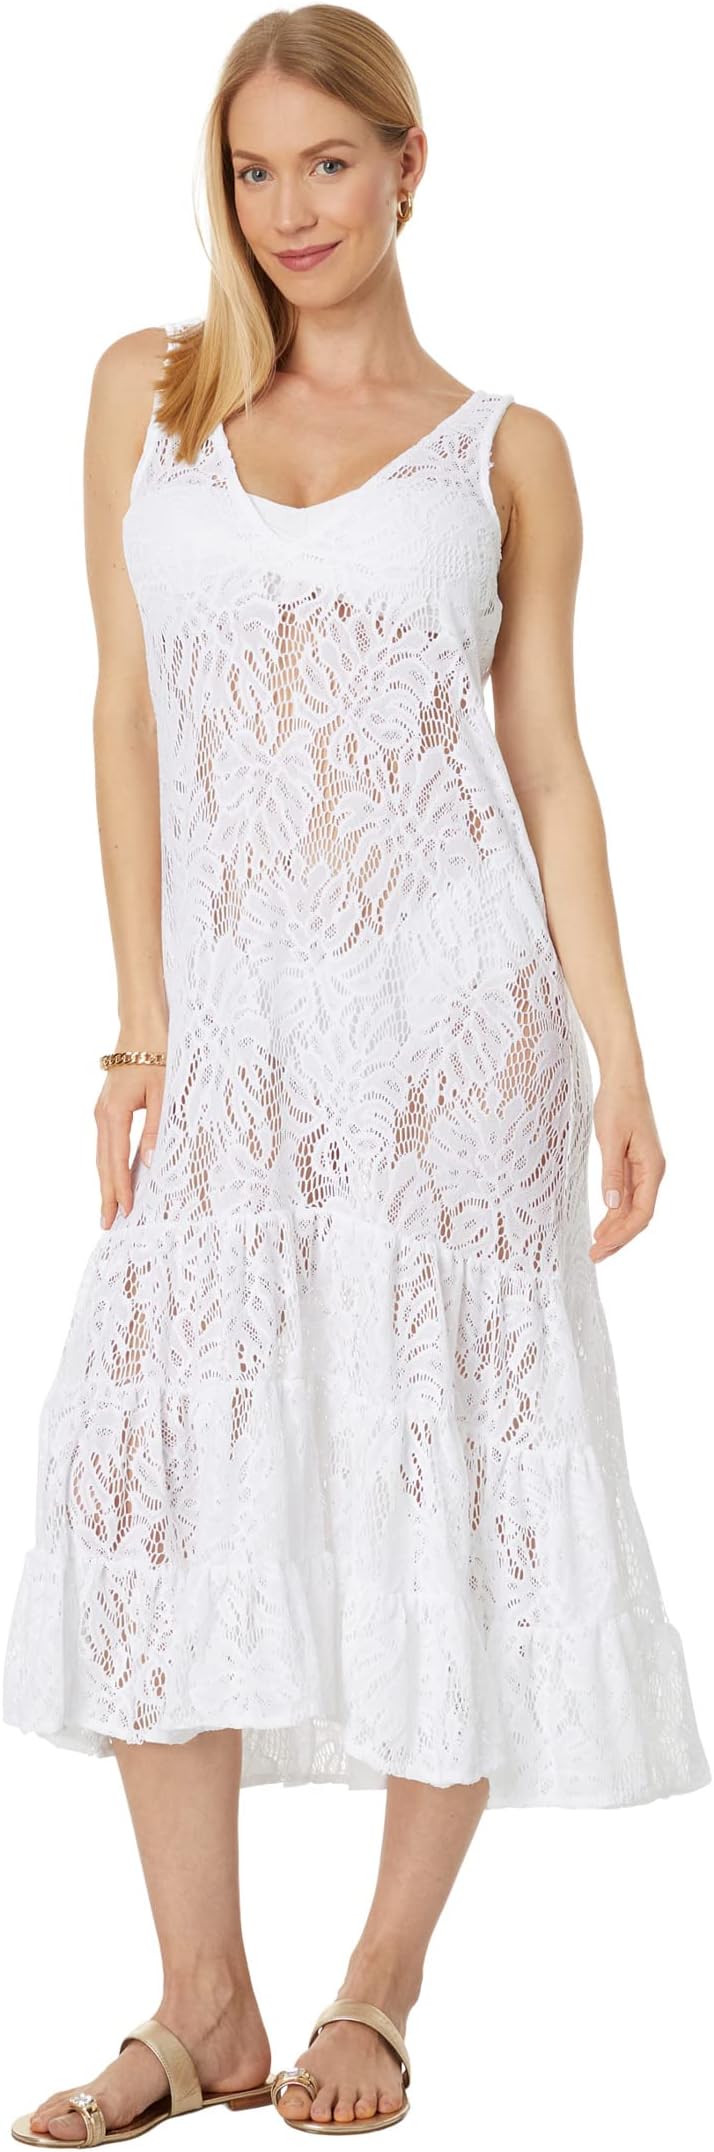 Накидка Finnley Lace Cover-Up Lilly Pulitzer, цвет Resort White Paradise Found Lace radisson collection paradise resort